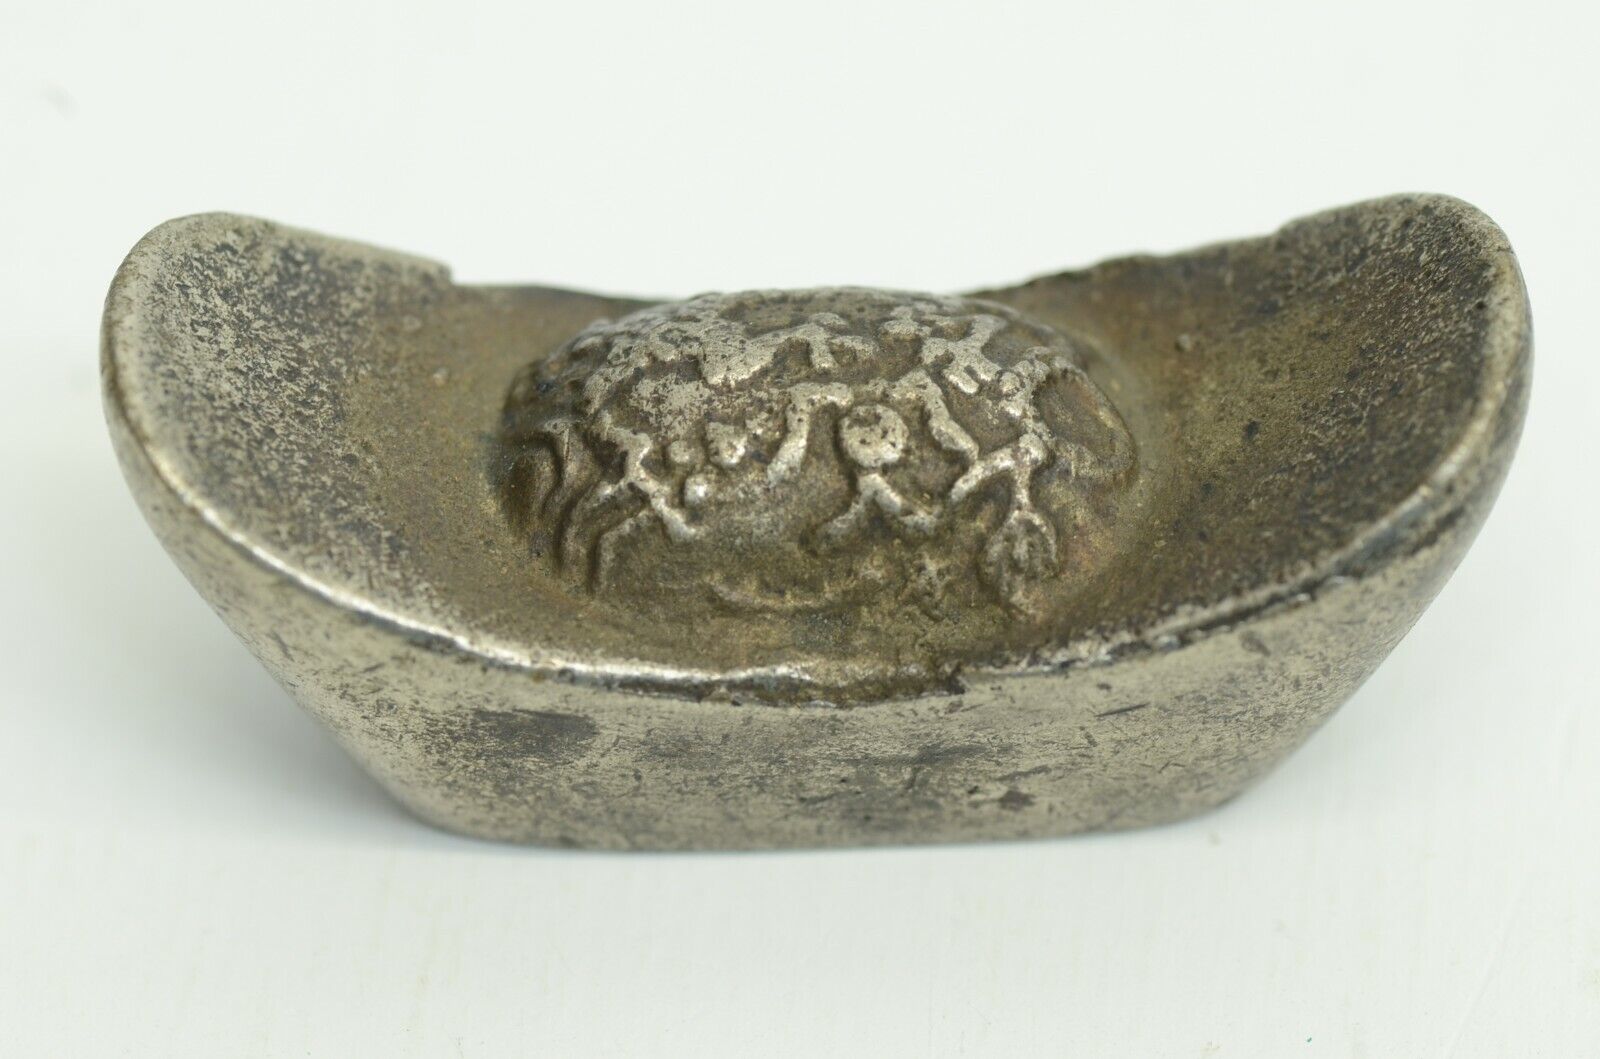 Antique Yuanbao Sycee Chinese Boat Silver Ingot 1820 Qing Dynasty